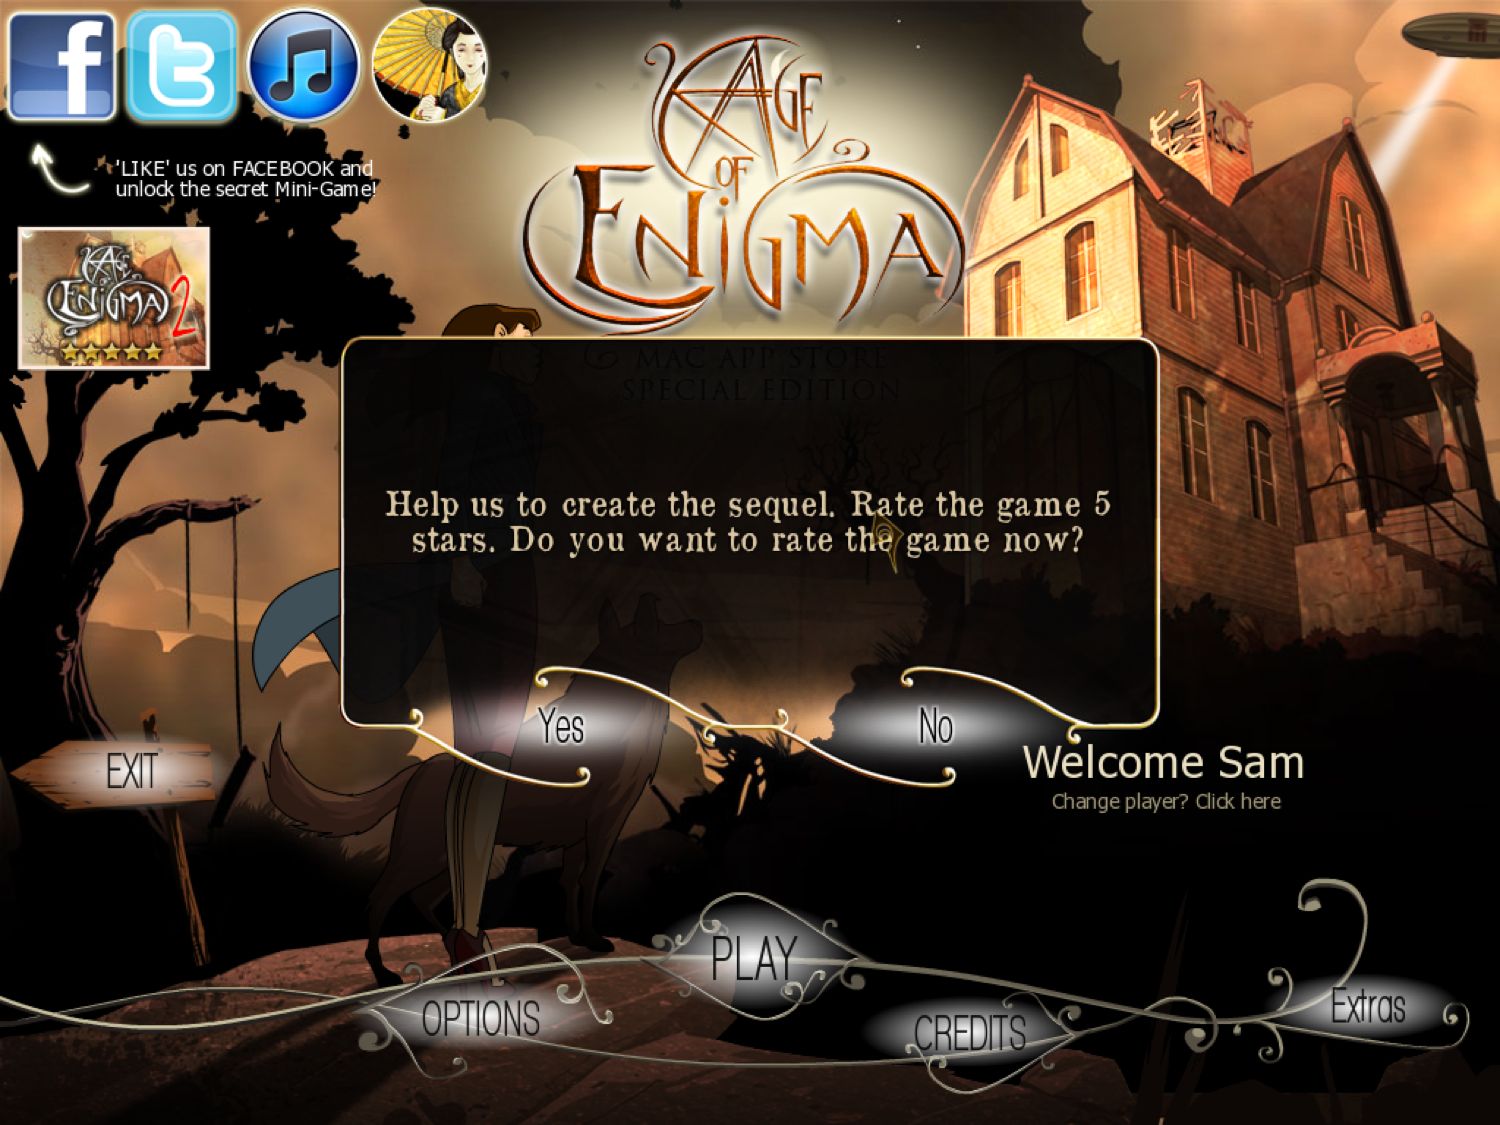 Age of Enigma: The Secret of the Sixth Ghost 1.0 : Title Screen